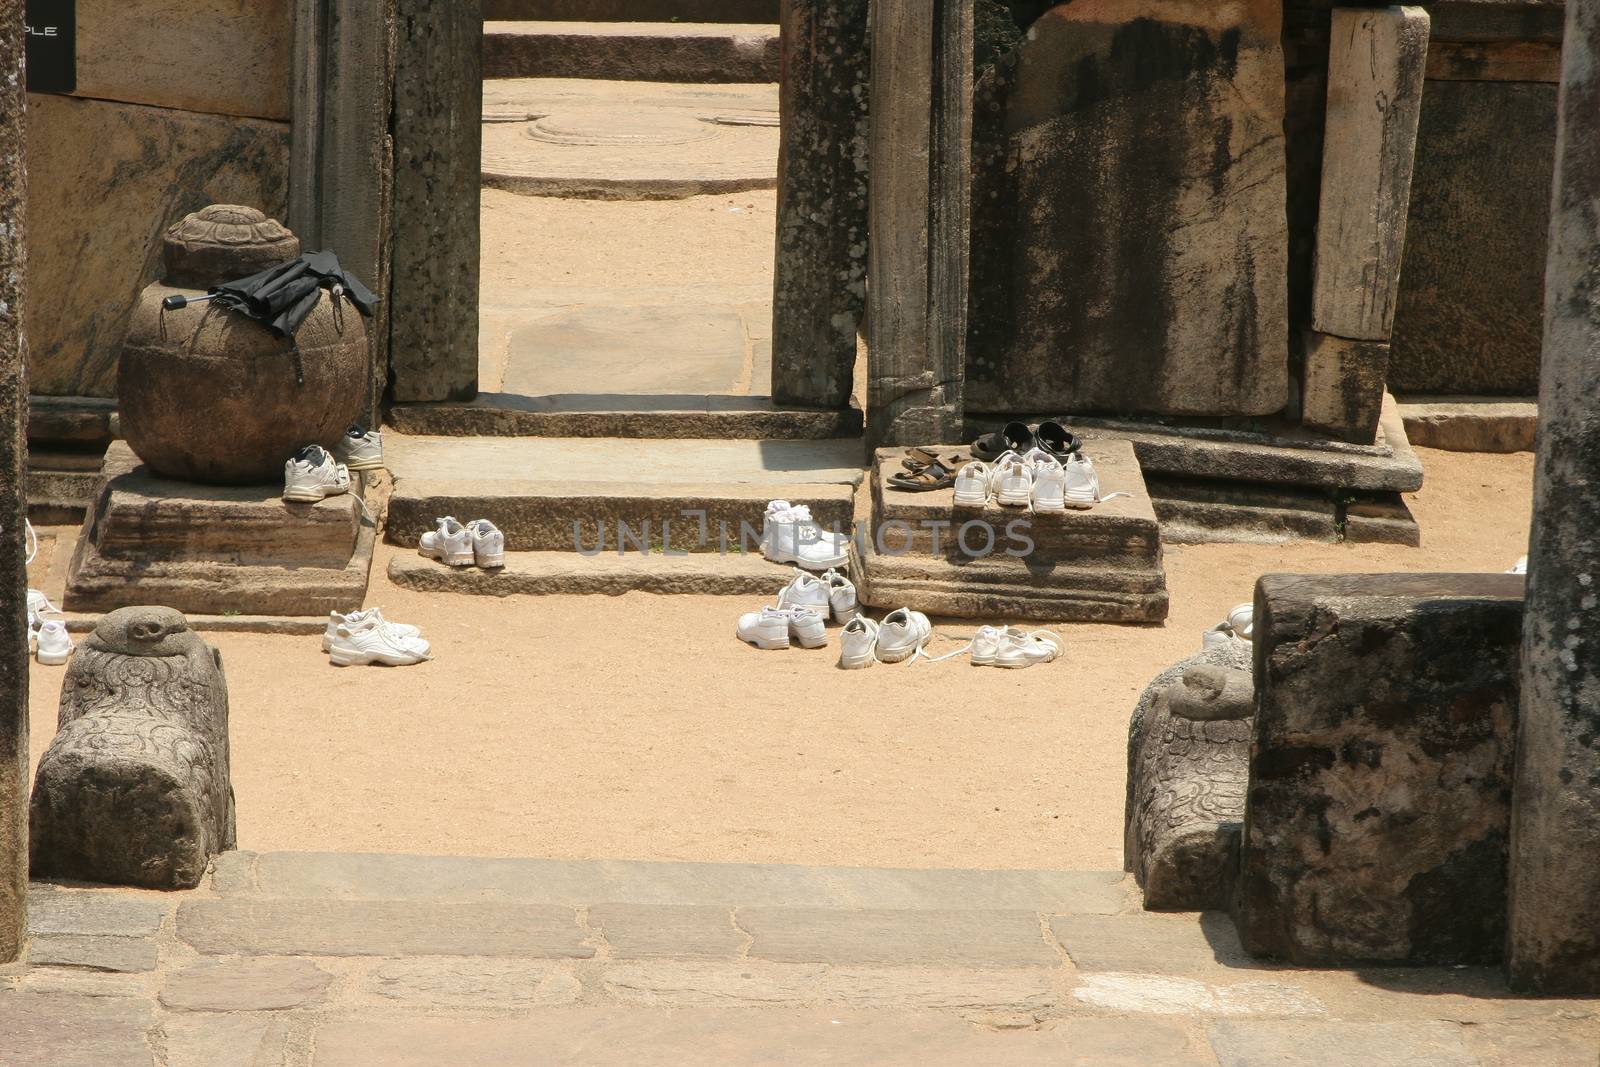 Polonnaruwa Sri Lanka Ancient ruin shoes removed before entering Buddhist shrine by kgboxford